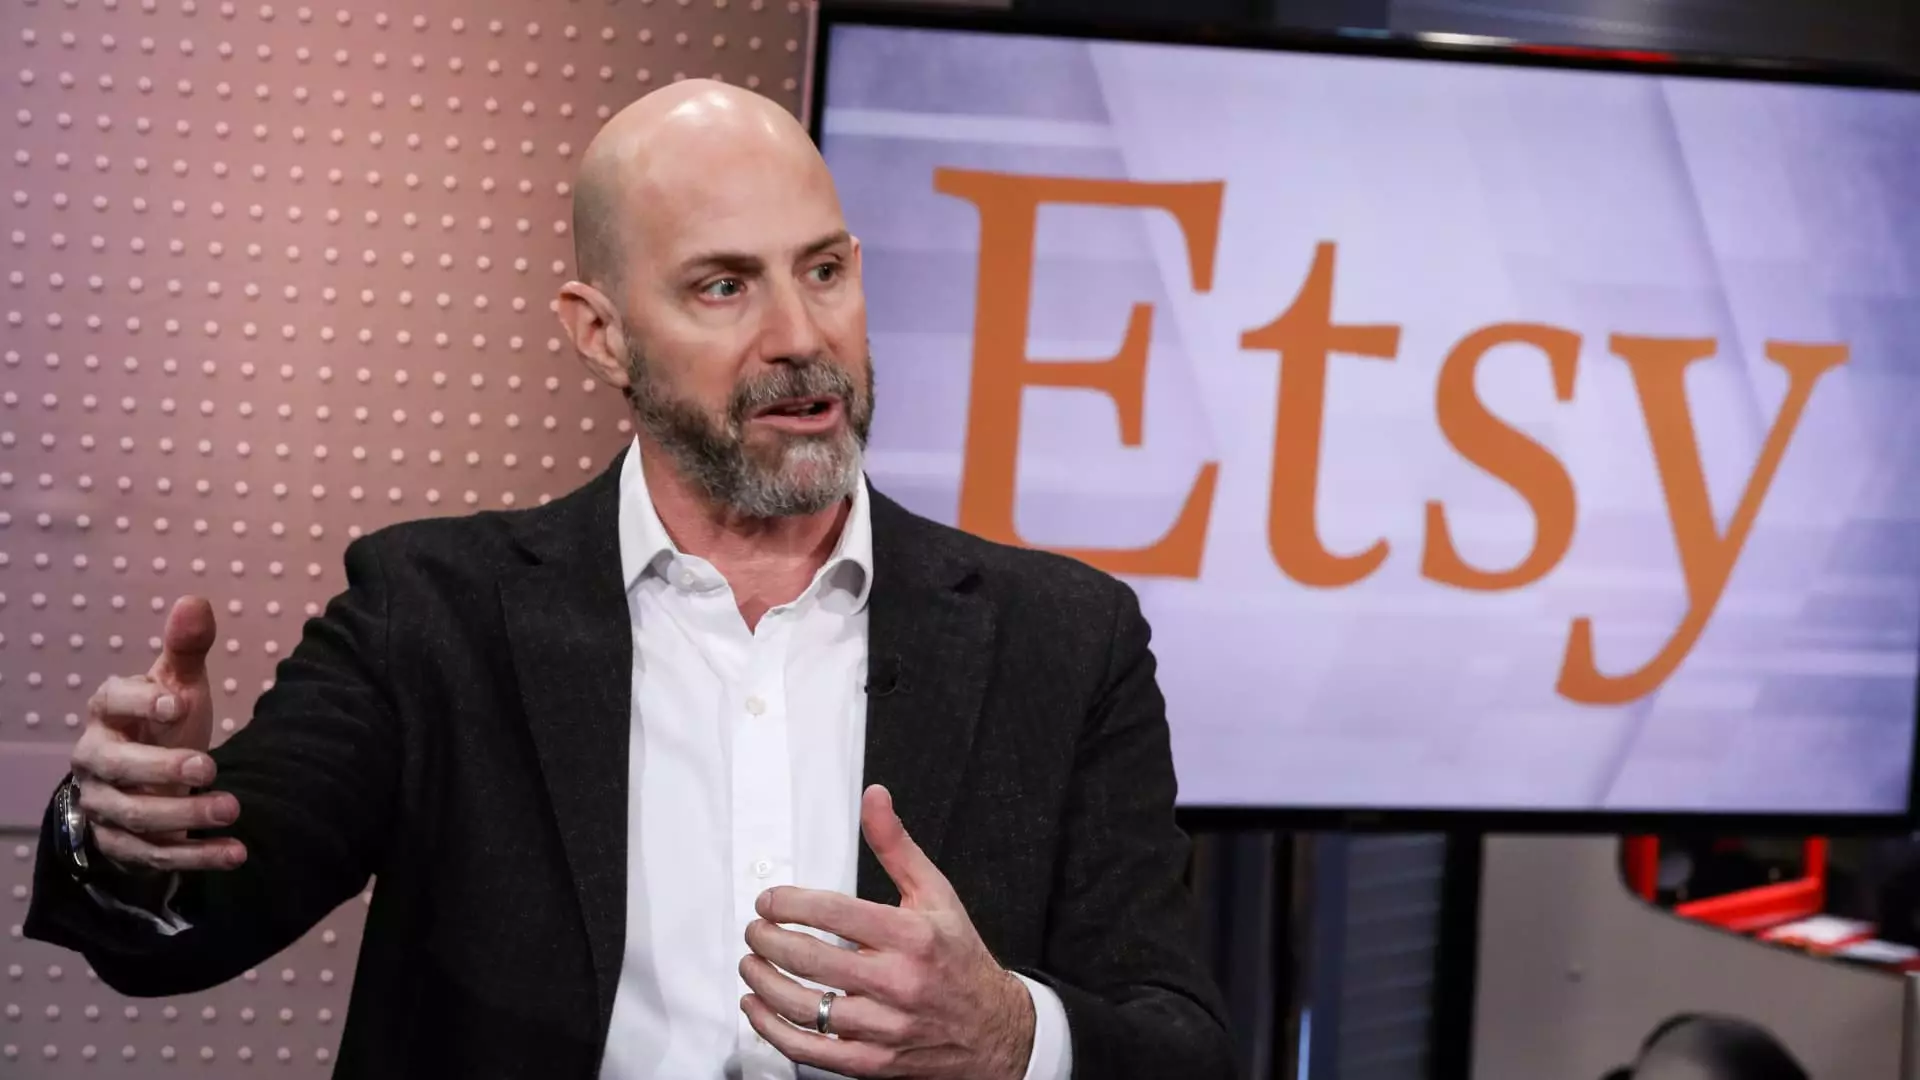 Etsy Announces Workforce Layoffs to Restructure Business and Cut Costs